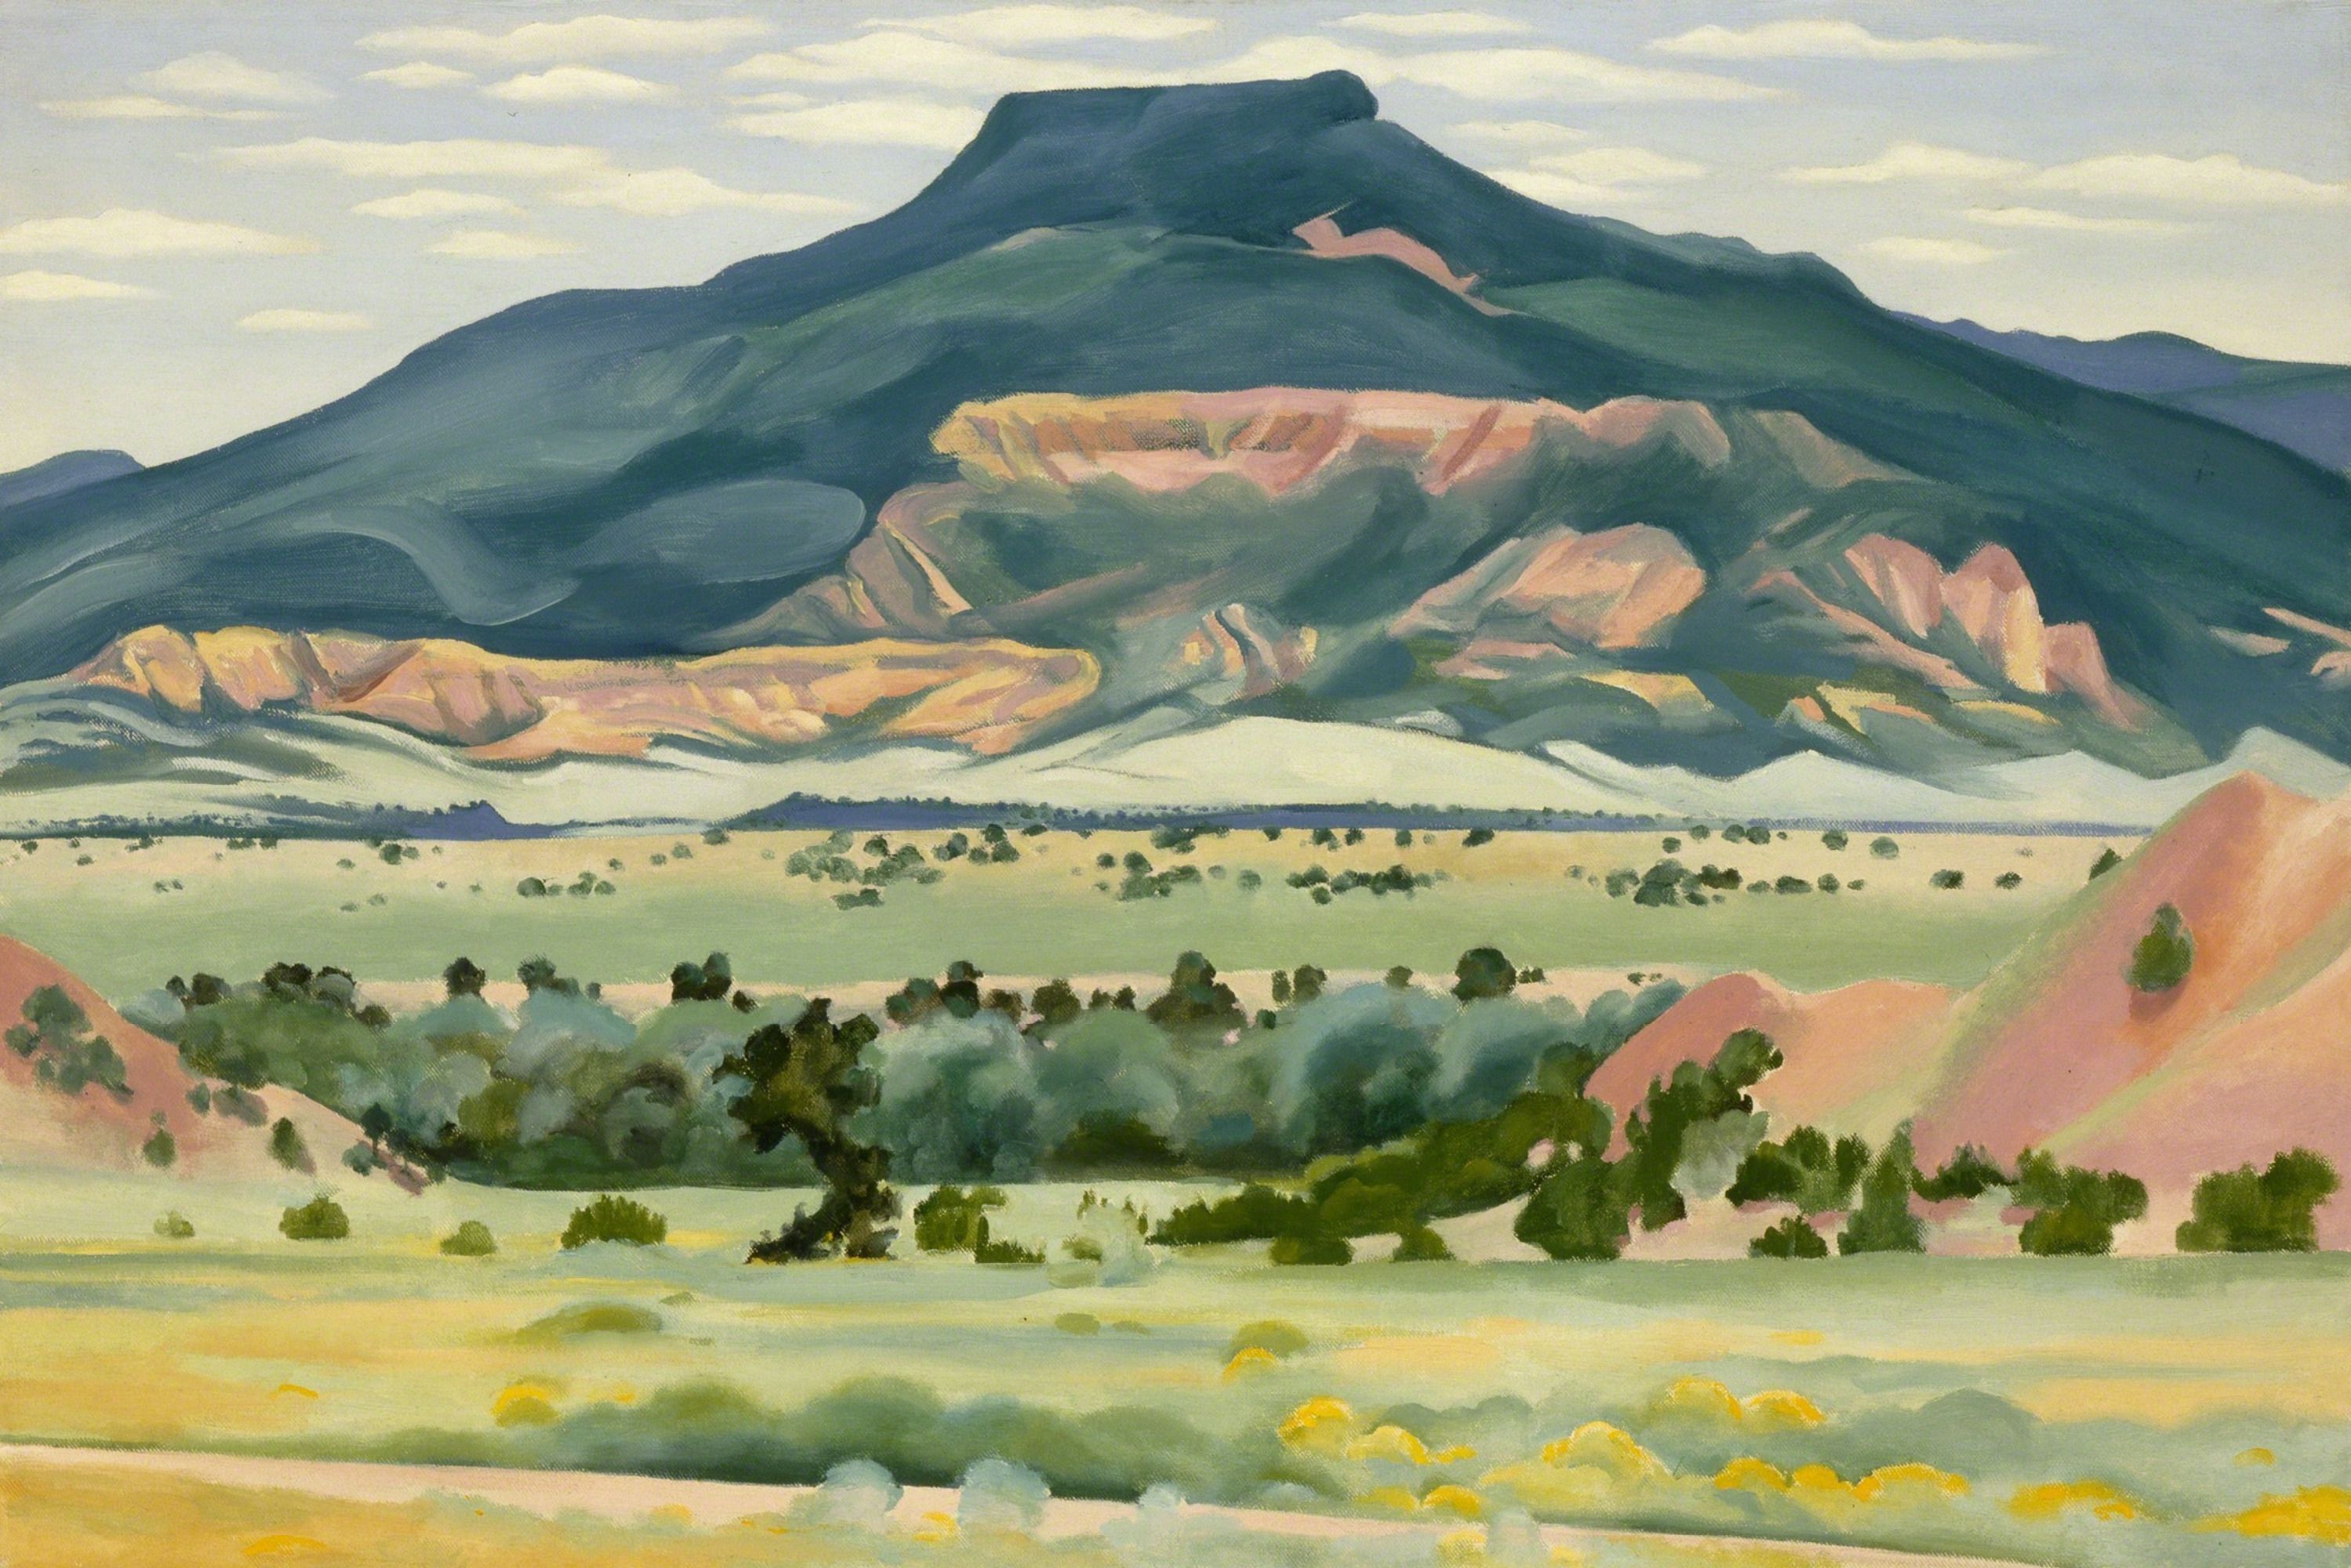 Painting - My Front Yard, Summer by Georgia O’Keeffe (1941)